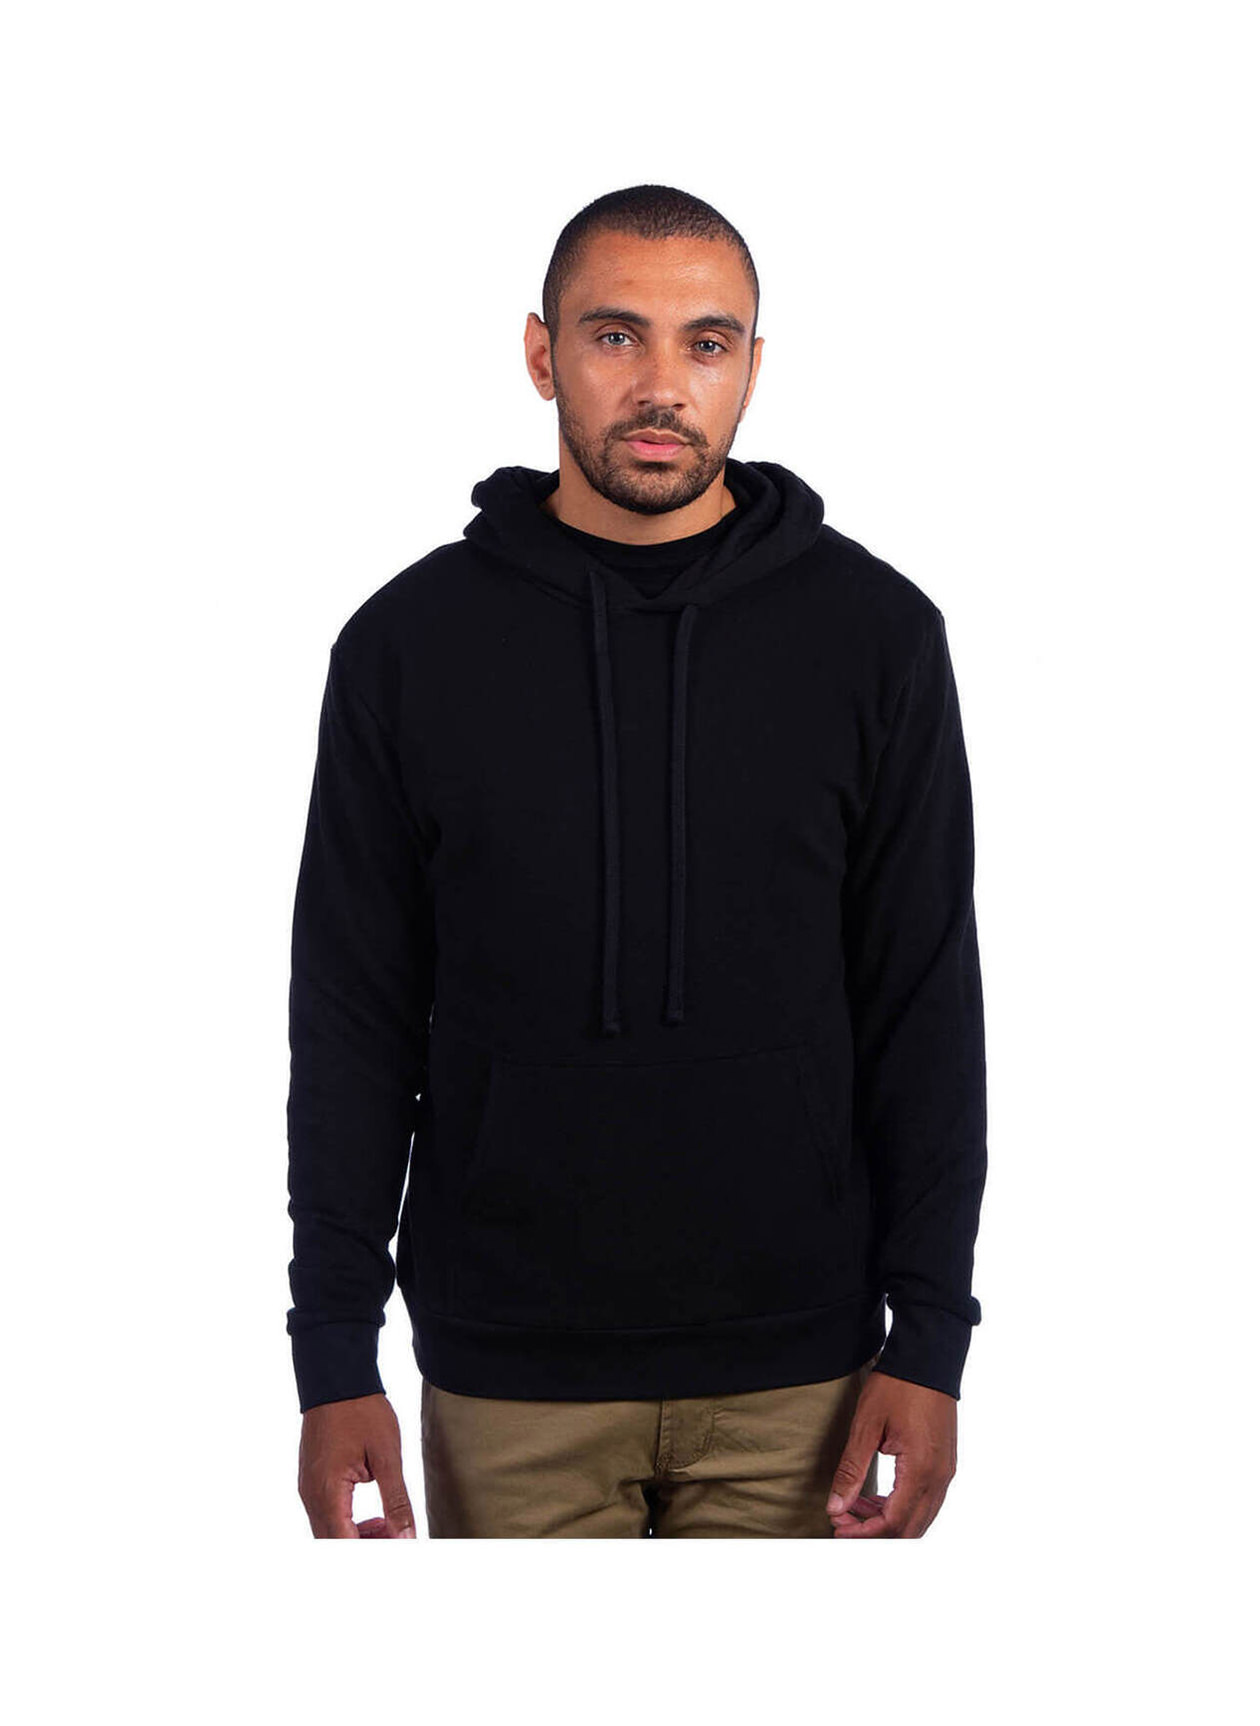 Next Level Men's Black Unisex Sueded French Terry Pullover Hoodie